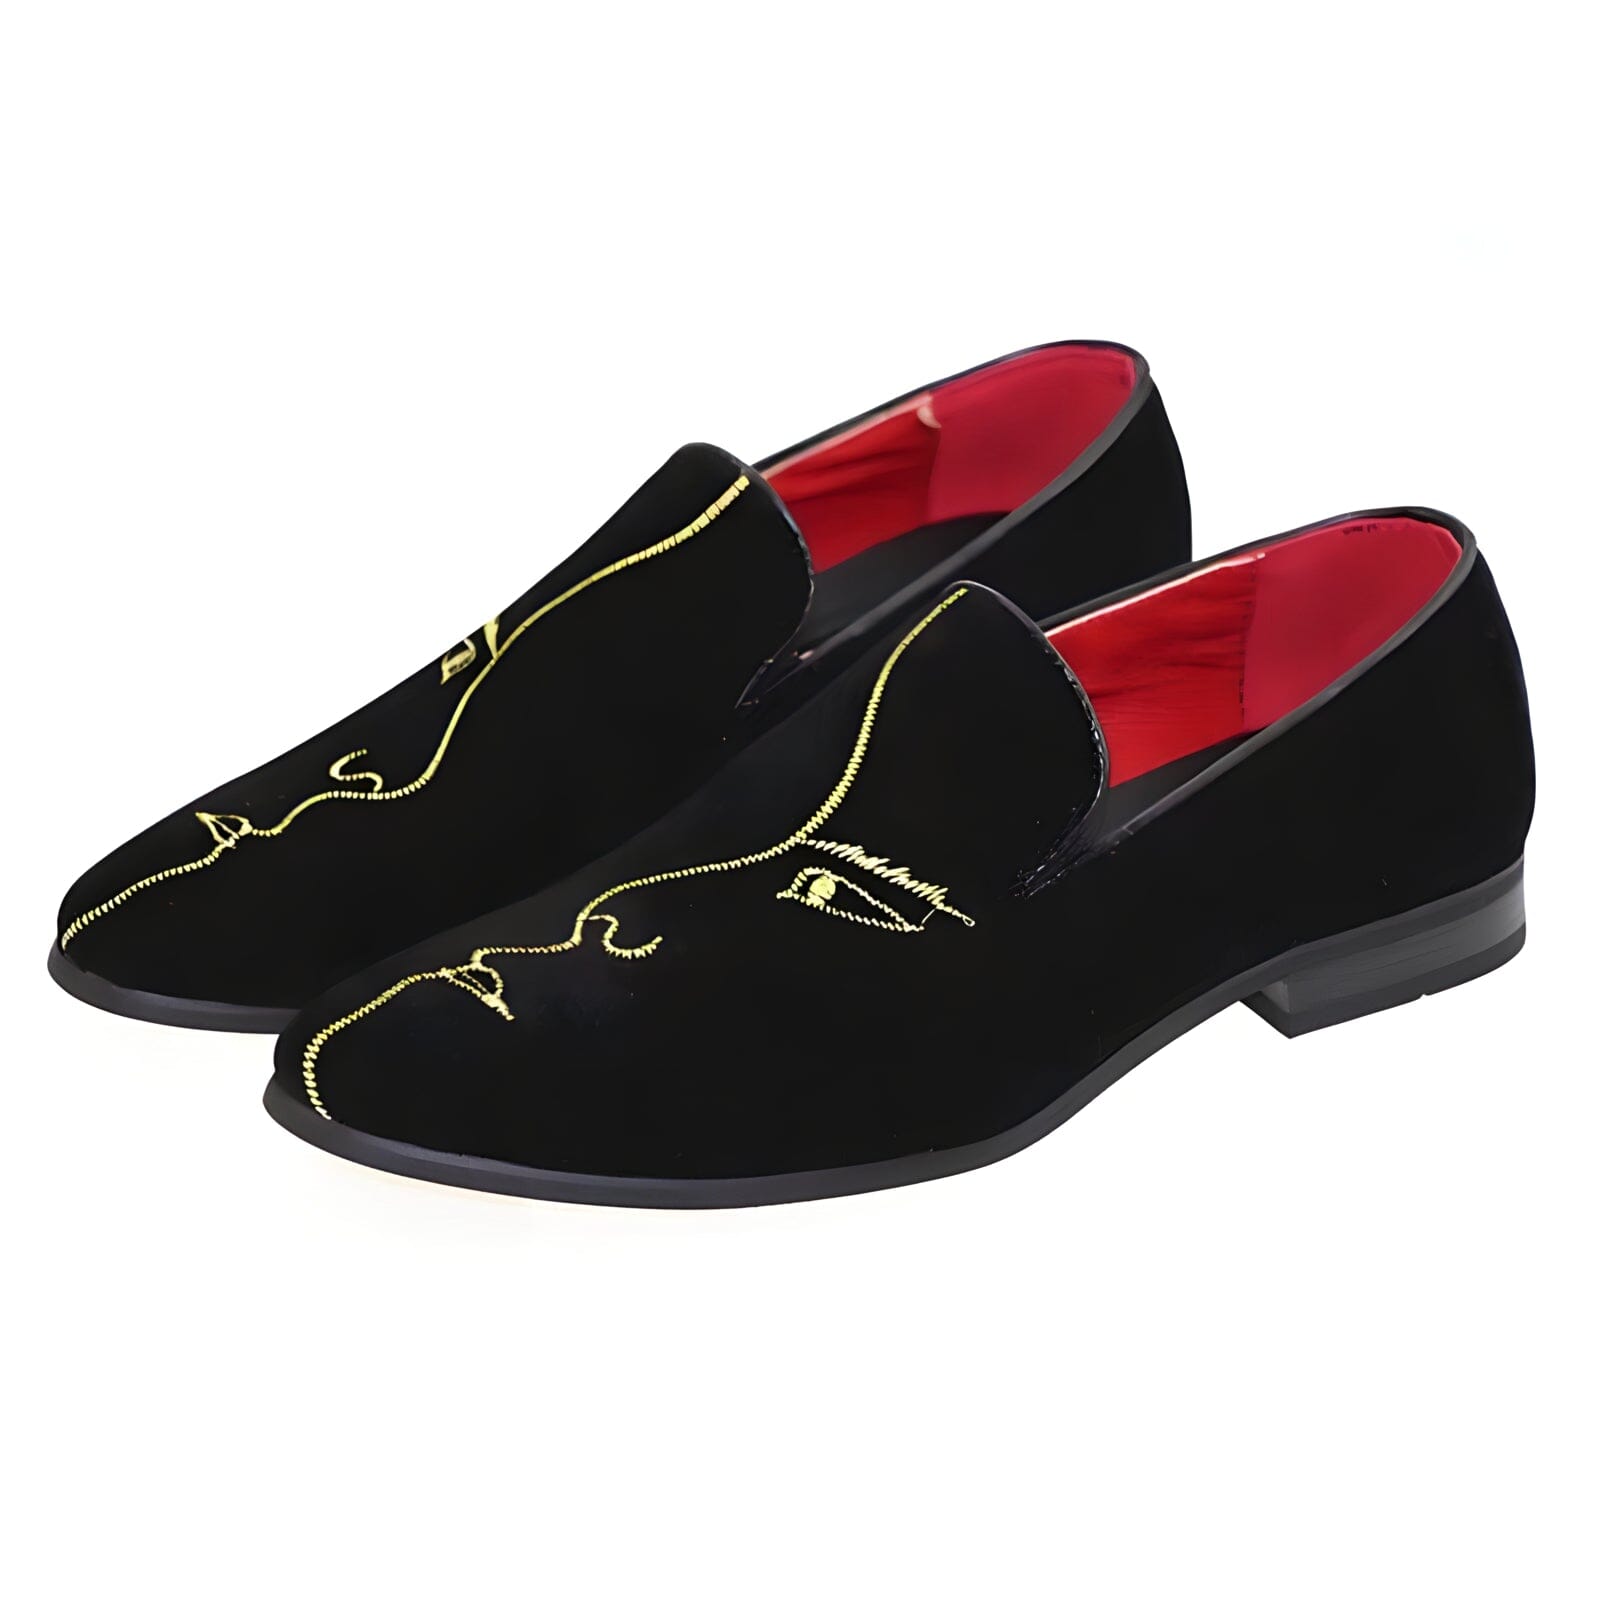 The Profile Embroidered Suede Penny Loafers WD Styles US 6 / EU 39 